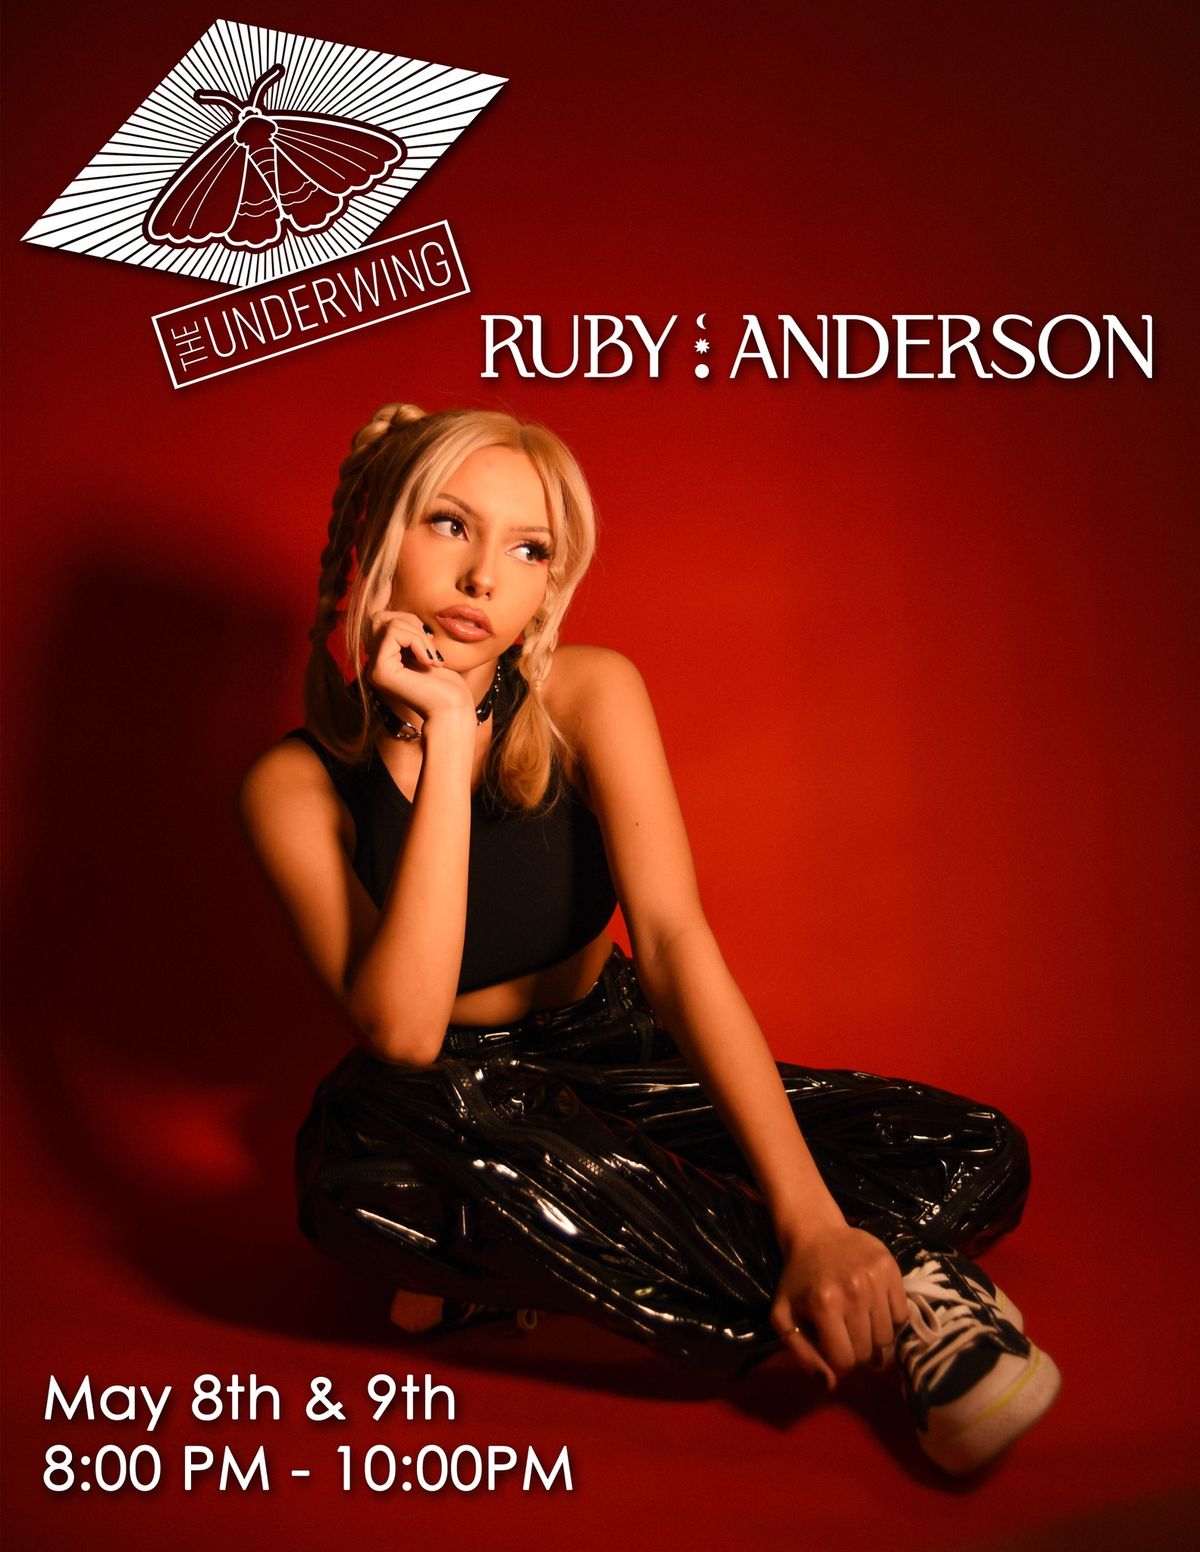 Ruby Anderson at The Underwing